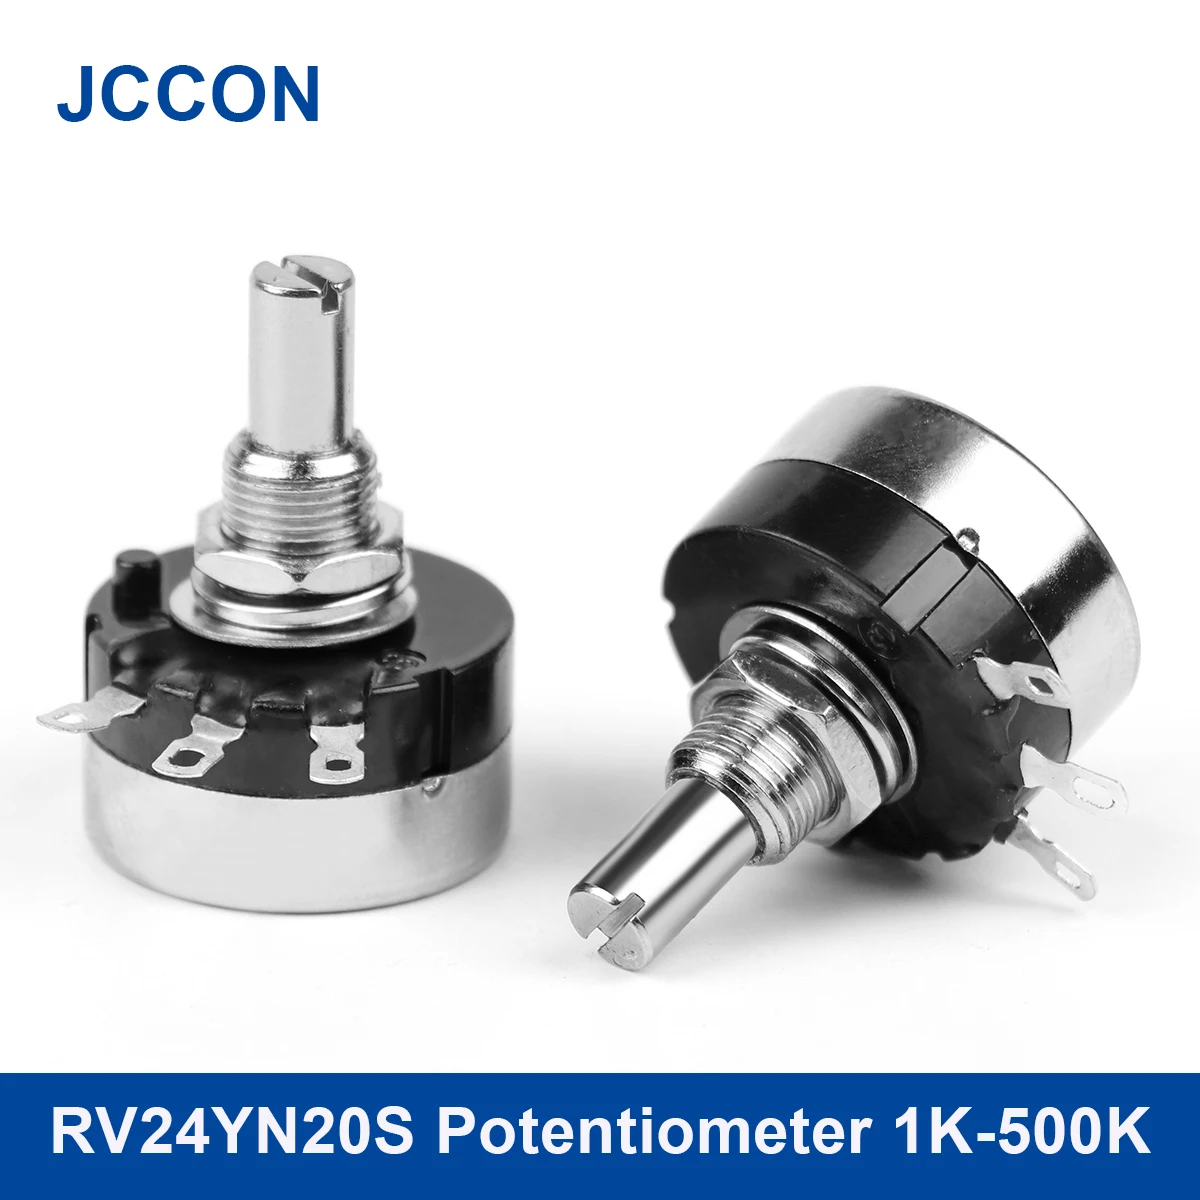 1Pcs RV24YN20S Potentiometer 1K 2K 20K 50K 100K 200K 500K Single-turn Carbon Film Potentiometer Vertical Rotary Switches 5pcs wh148 1k 5k 10k 50k 100k 500k 1m ohm 20mm 6 pin carbon film potentiometer rotary switch knobs cap kit